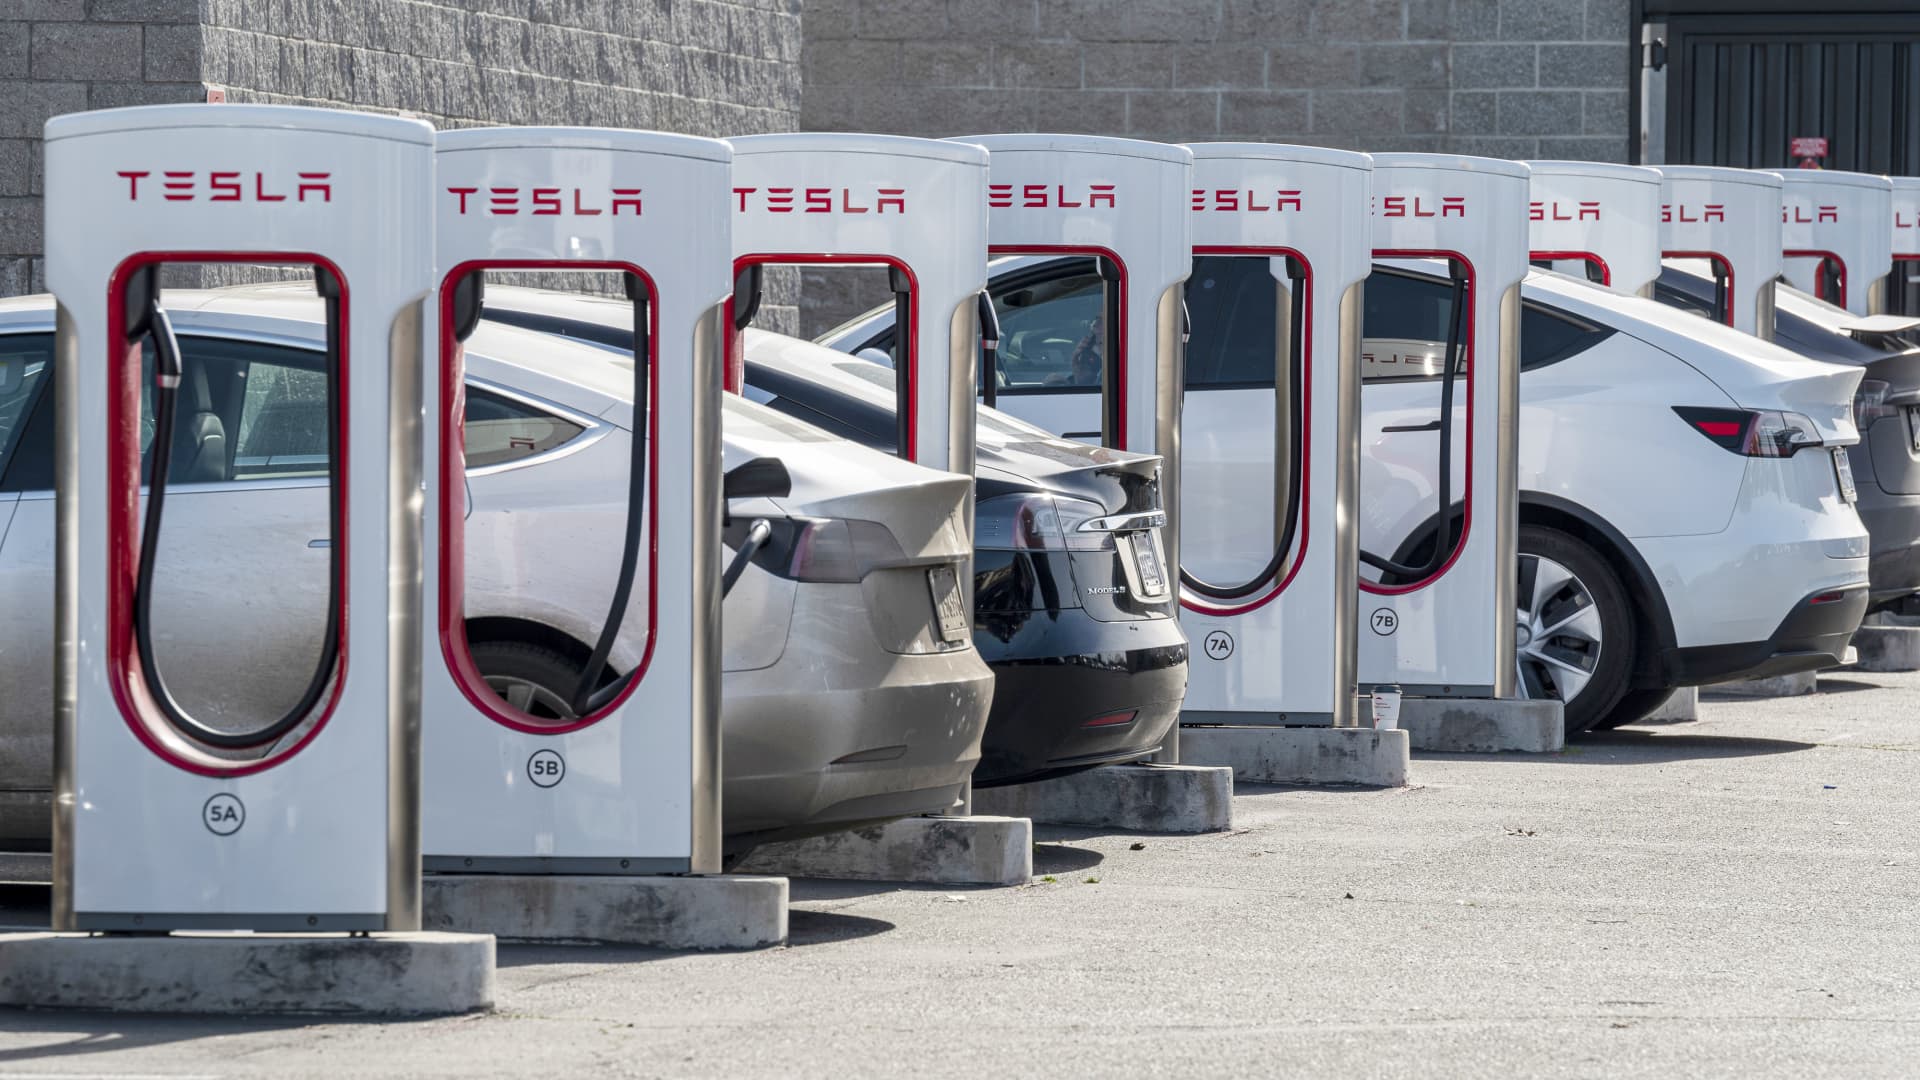 x4 - Financial Futurism - EV charging: Biden officials say Tesla will open its network to competitors, part of pledge for 500K chargers made 'as easy as filling with gas' -